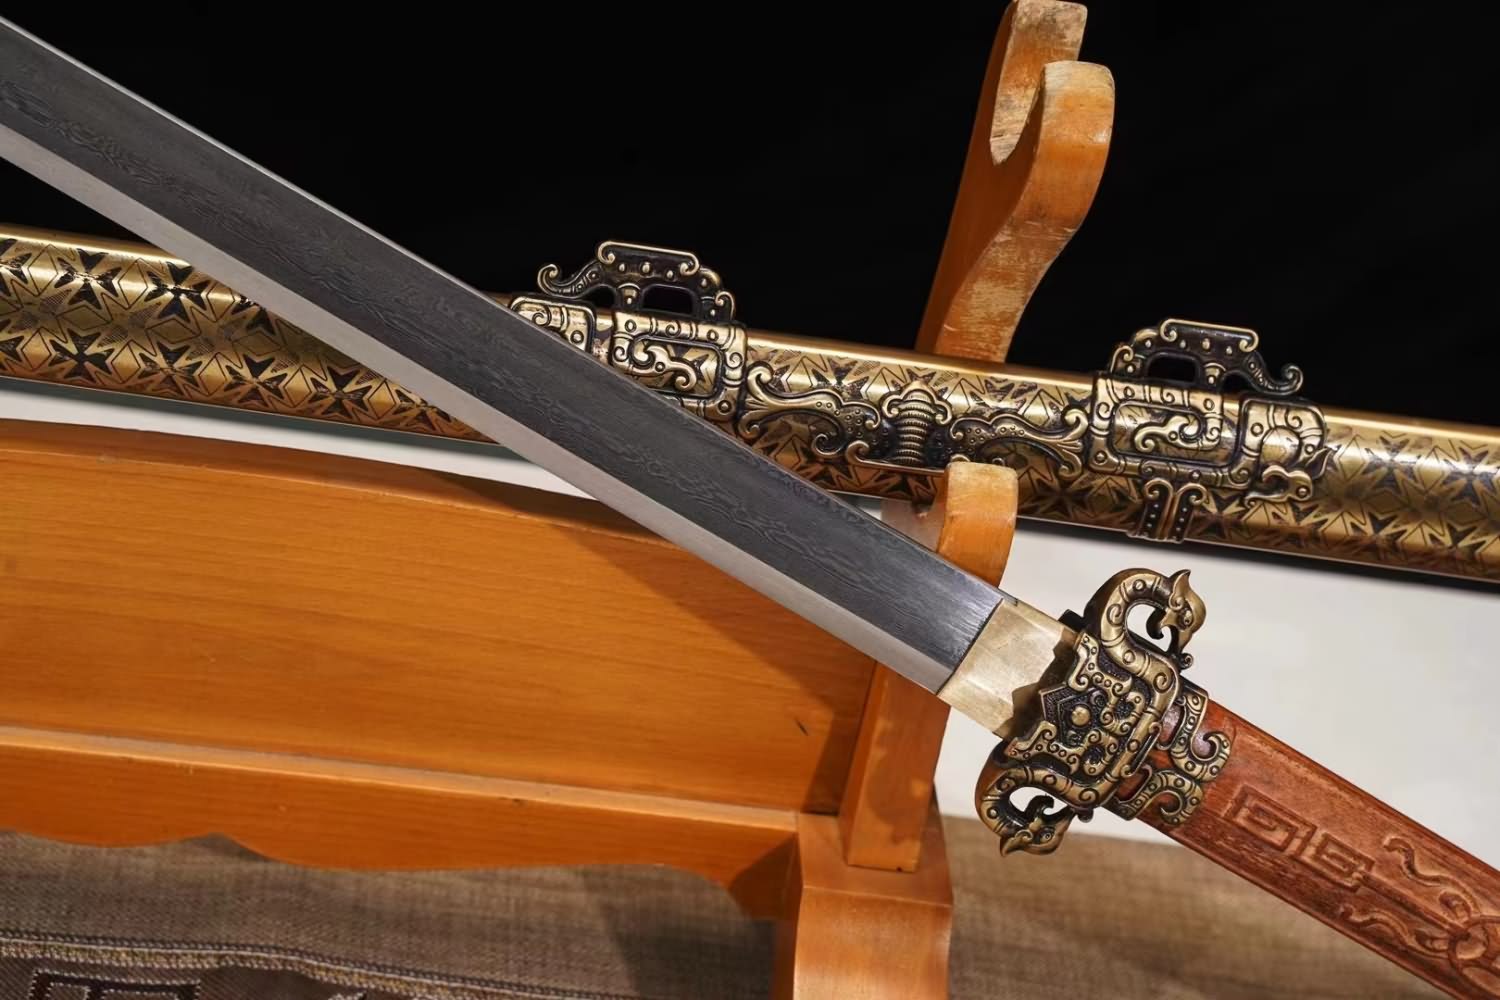 LOONGSWORD Chinese Sword Tang dao -Forged Damascus Steel Blade, Brass Scabbard, Collectible and Functional